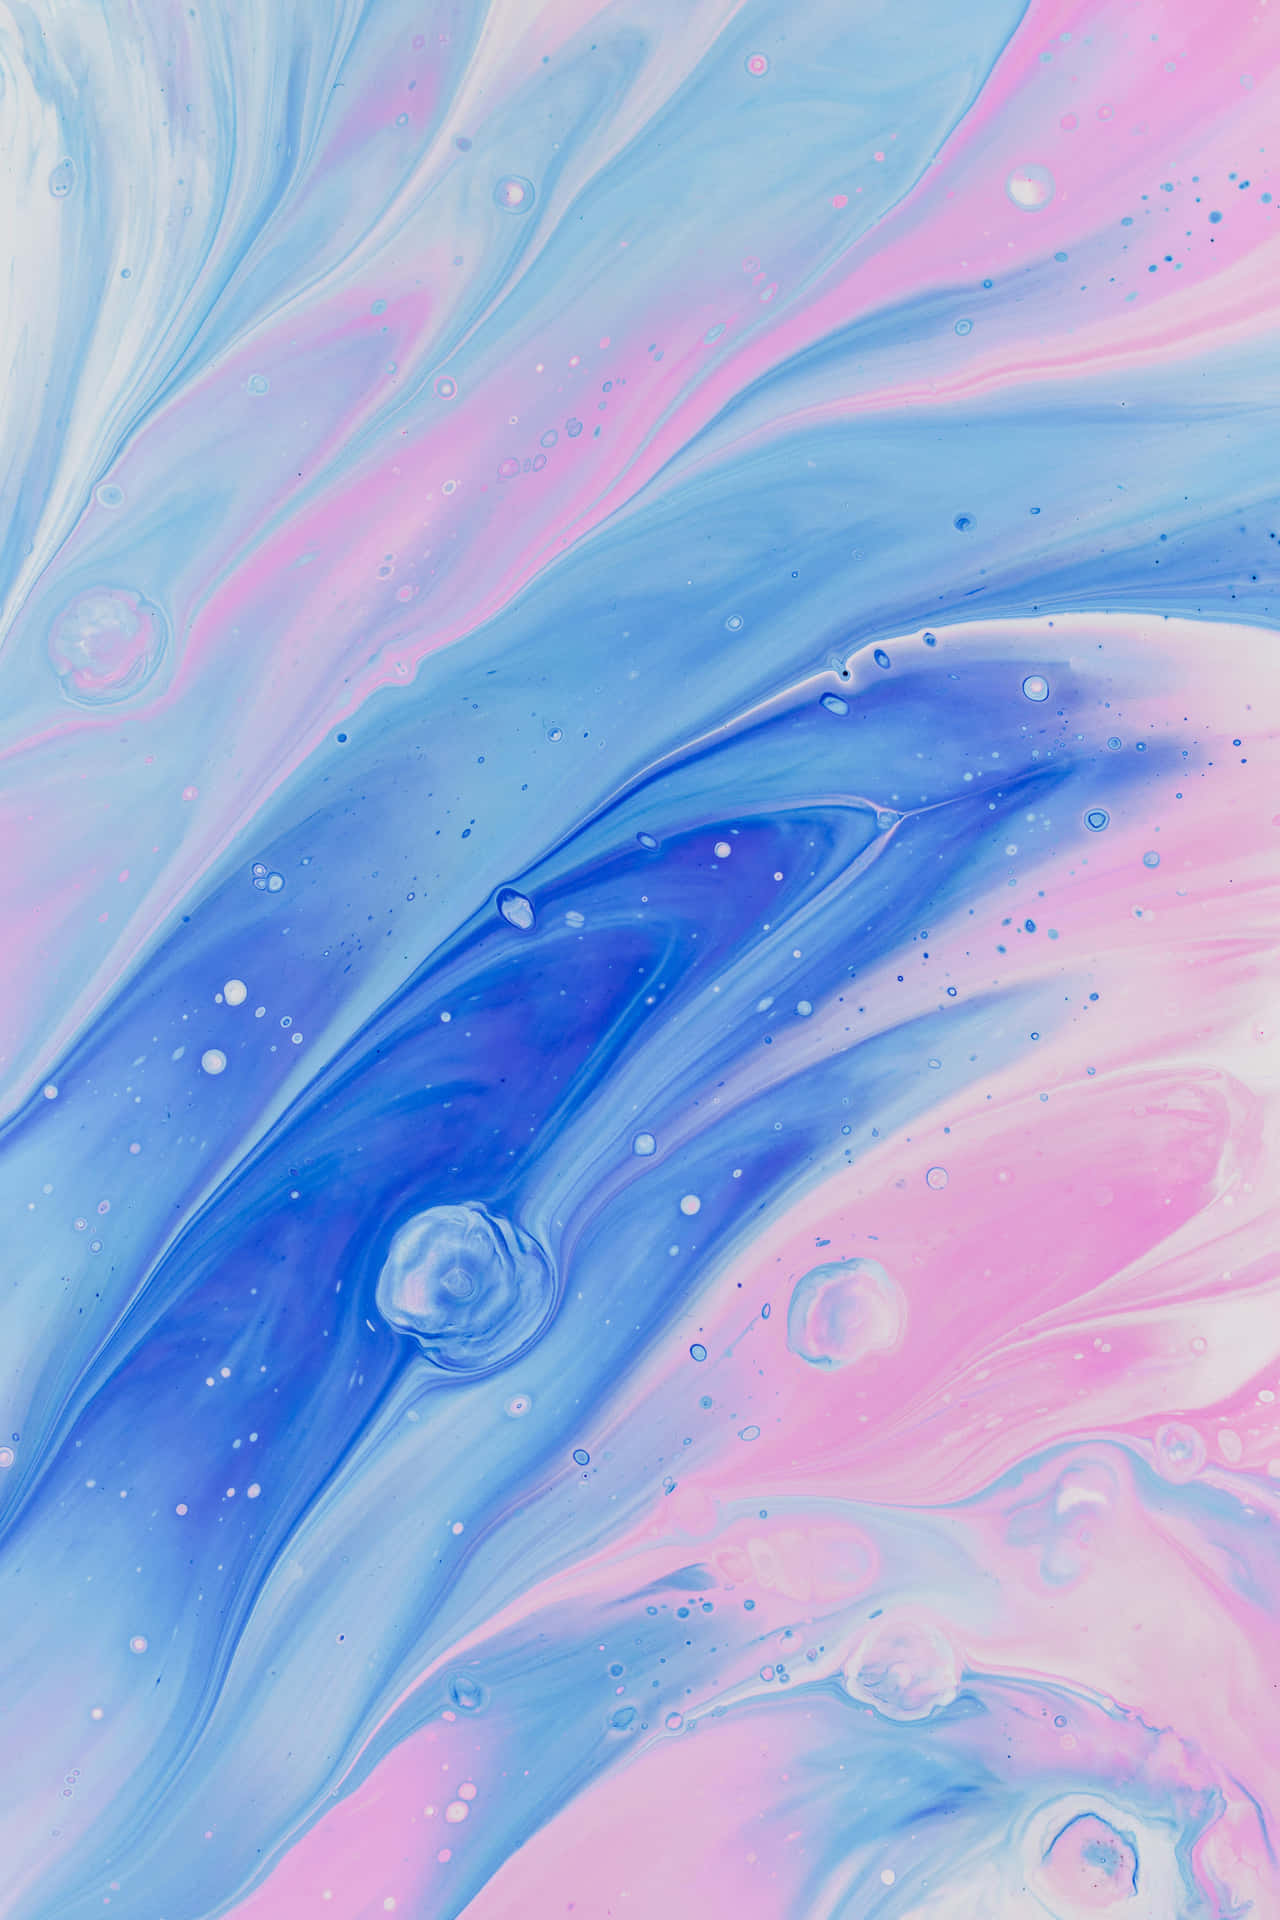 A Blue And Pink Swirling Liquid